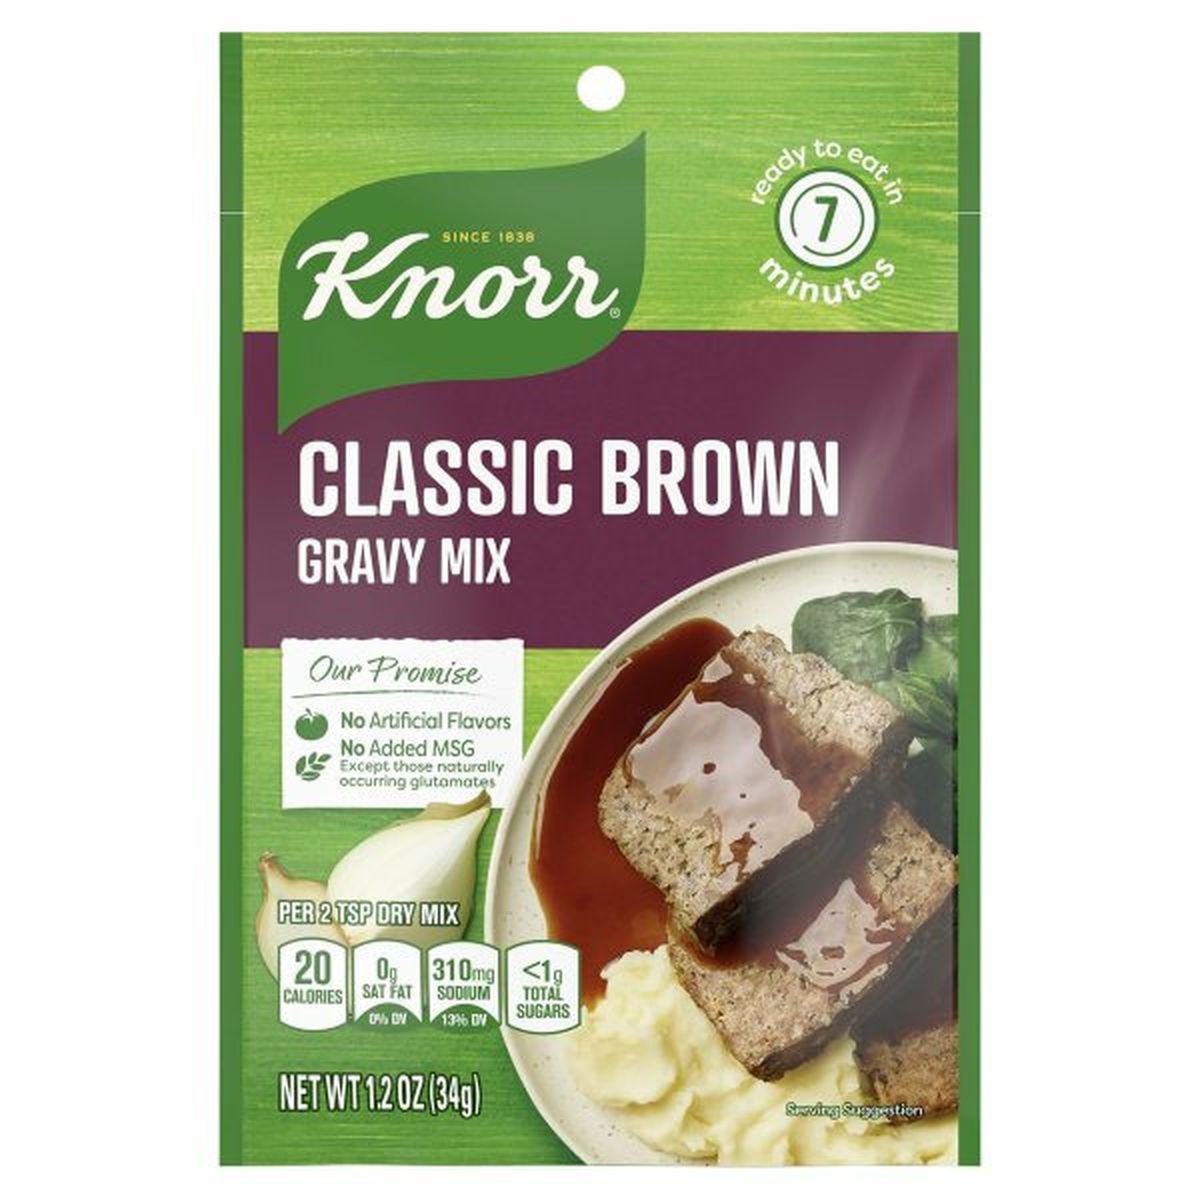 Calories in Knorr Gravy Mix, Classic Brown